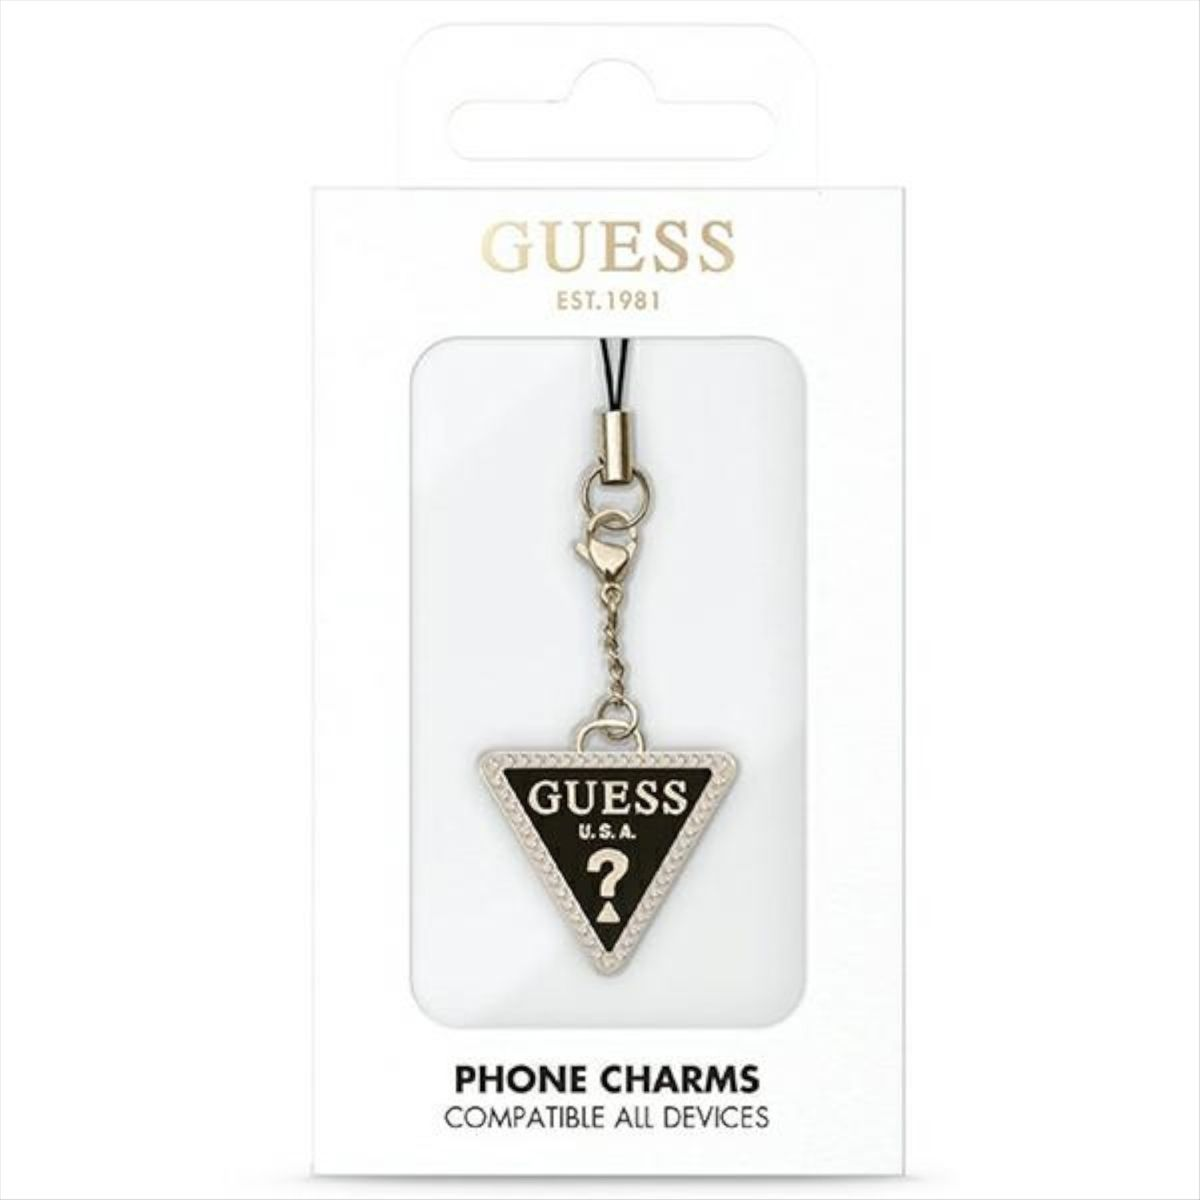 Rhinestones Guess GUESS Umhängetasche, Strap Phone Triangle Anhänger, Universell, Diamond Schwarz with Charm Universell,